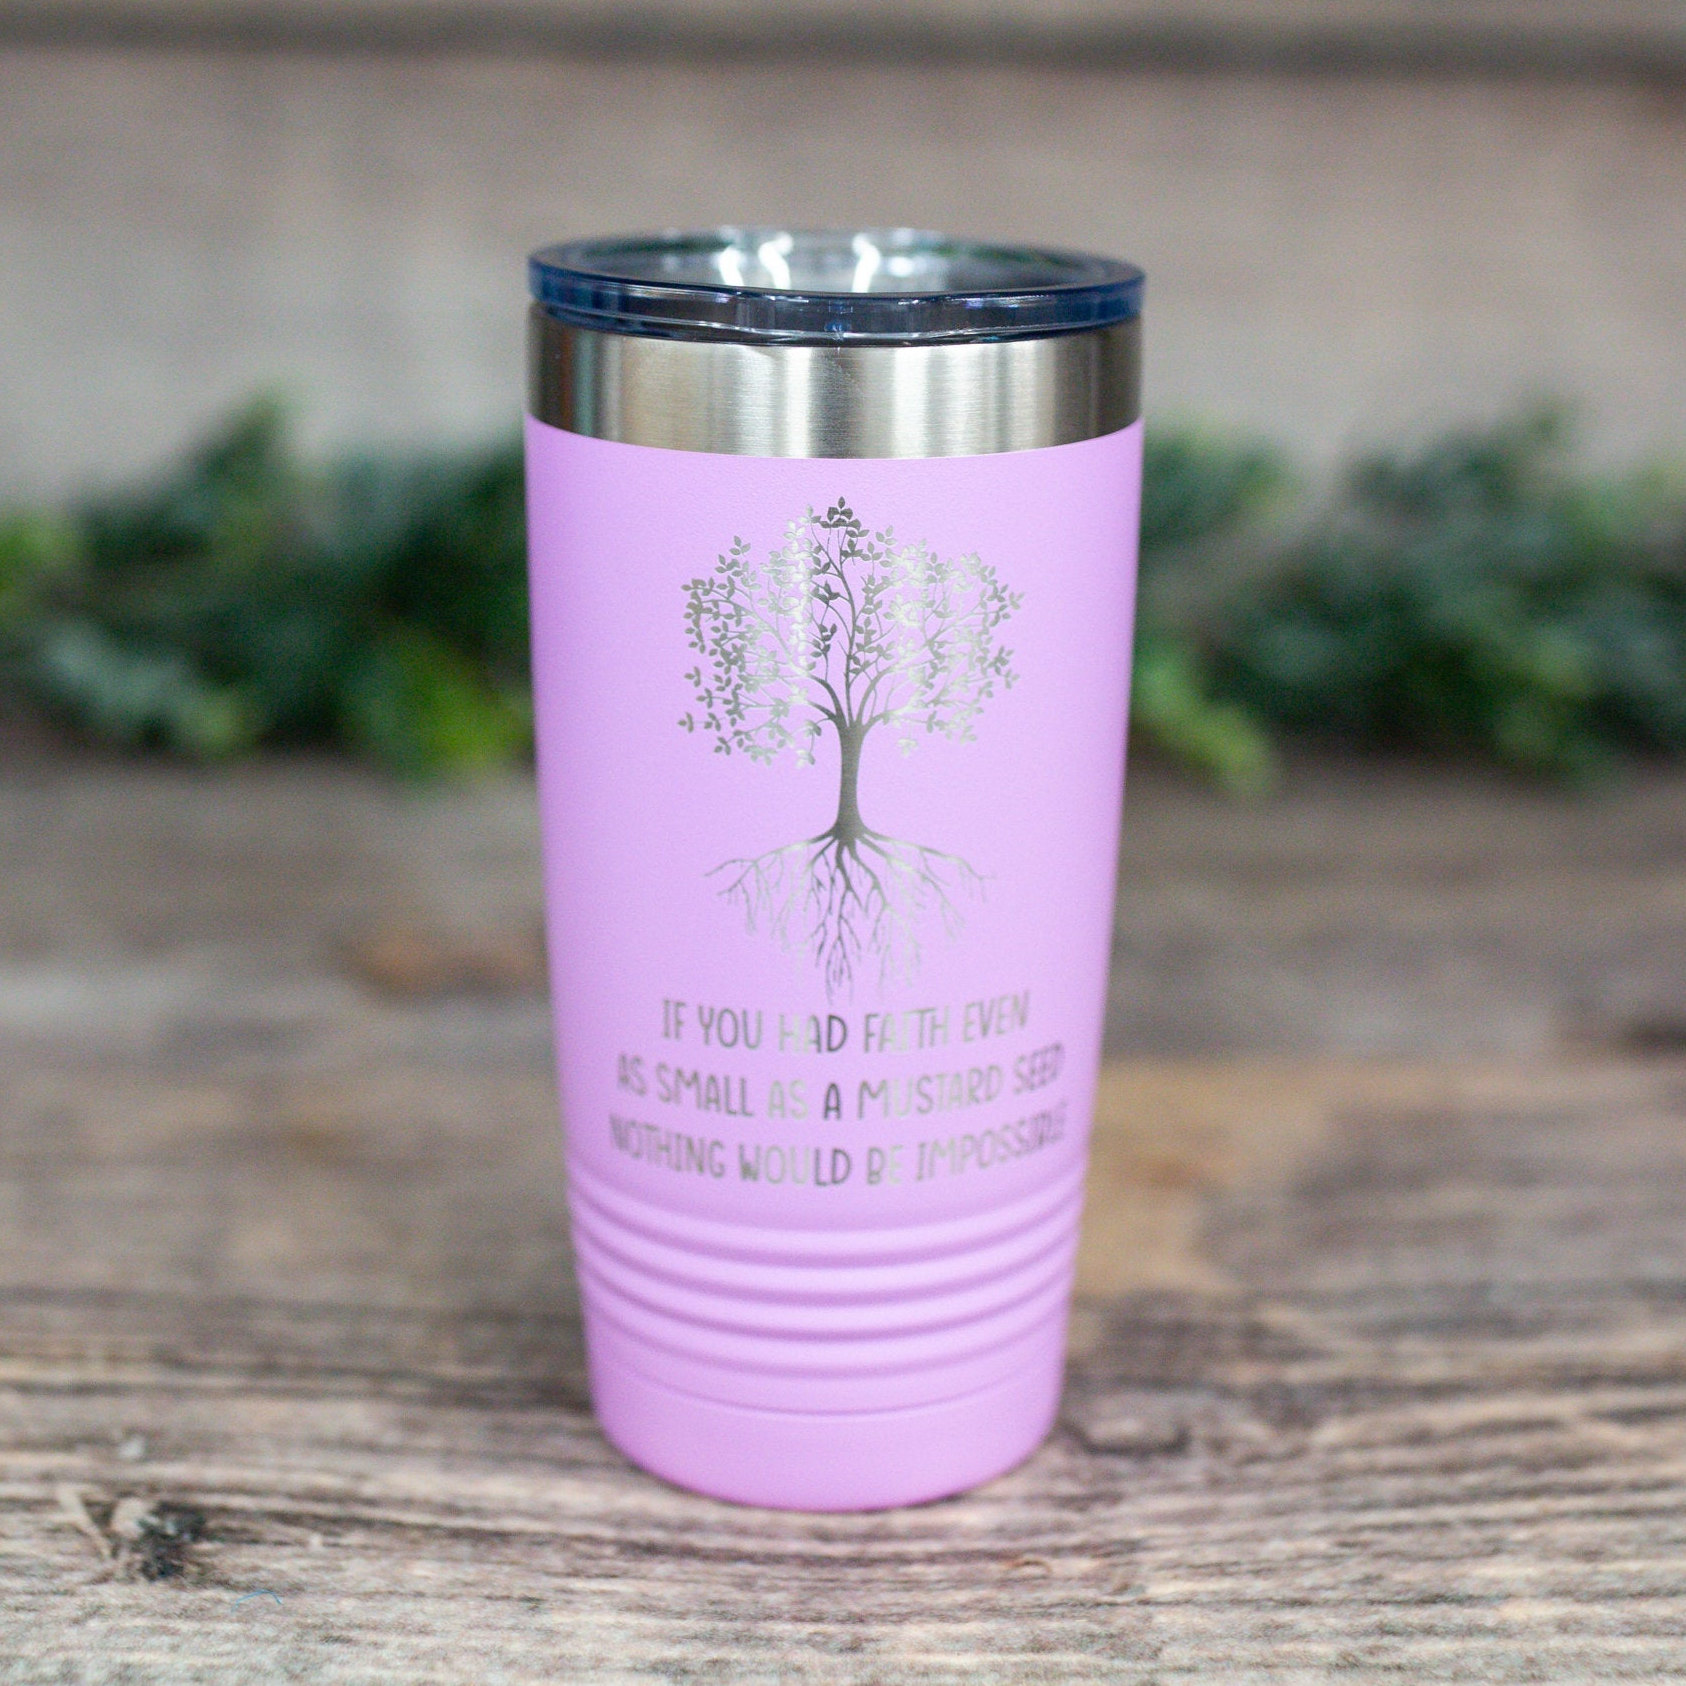 https://3cetching.com/wp-content/uploads/2021/07/if-you-had-faith-even-as-small-as-a-mustard-seed-engraved-stainless-tumbler-religious-gift-christian-tumbler-60f7323b.jpg